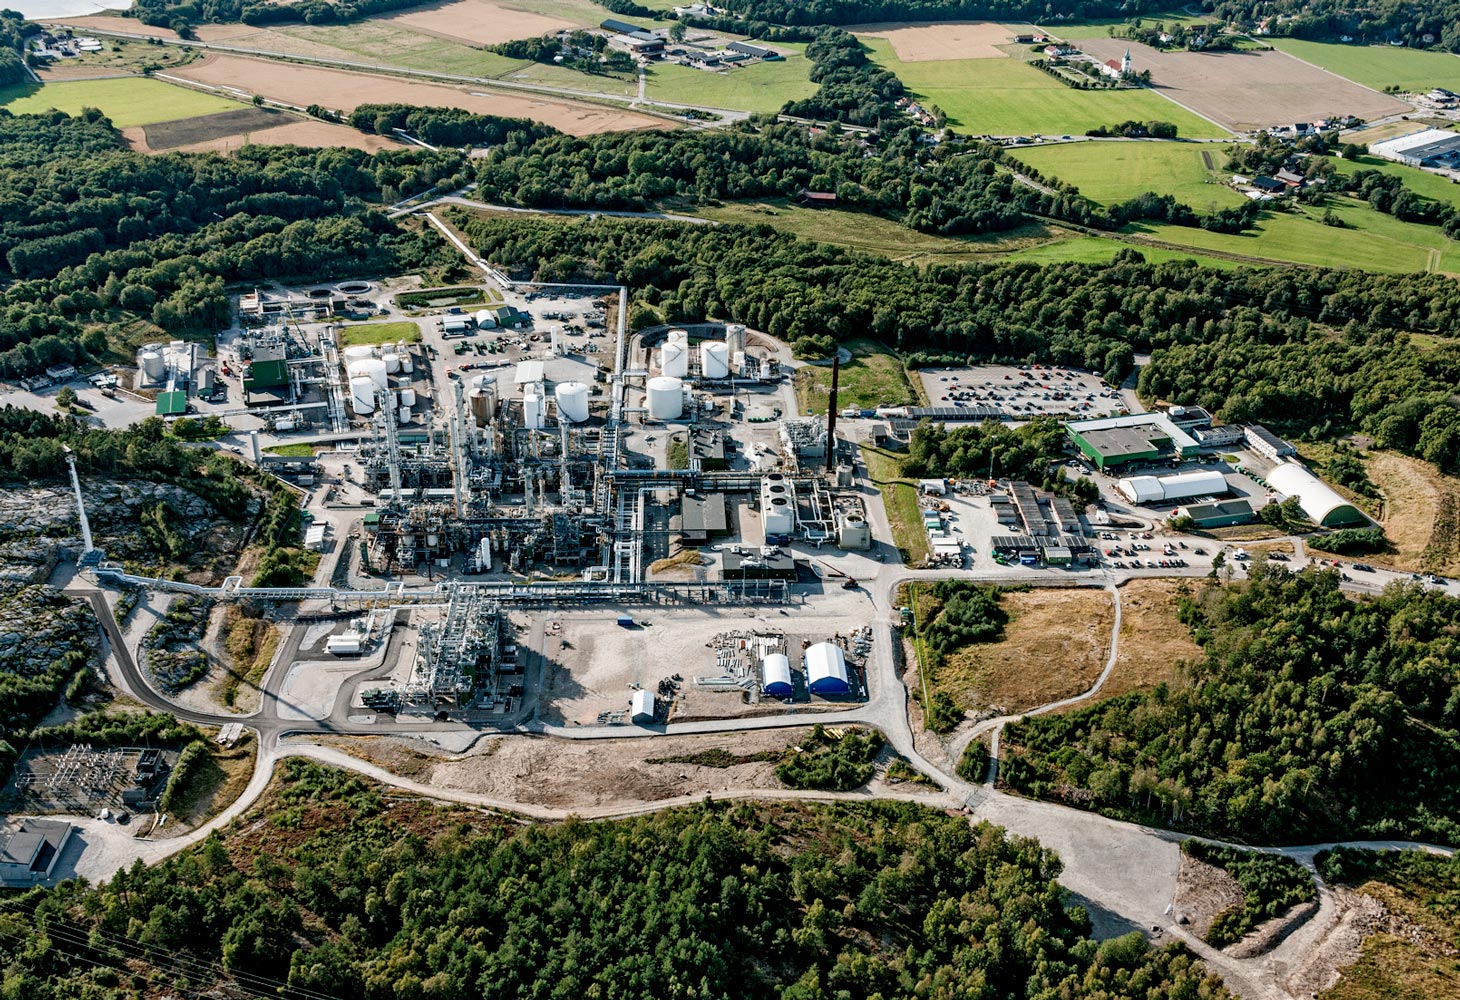 Perstorp to increase 2-EHA production capacity